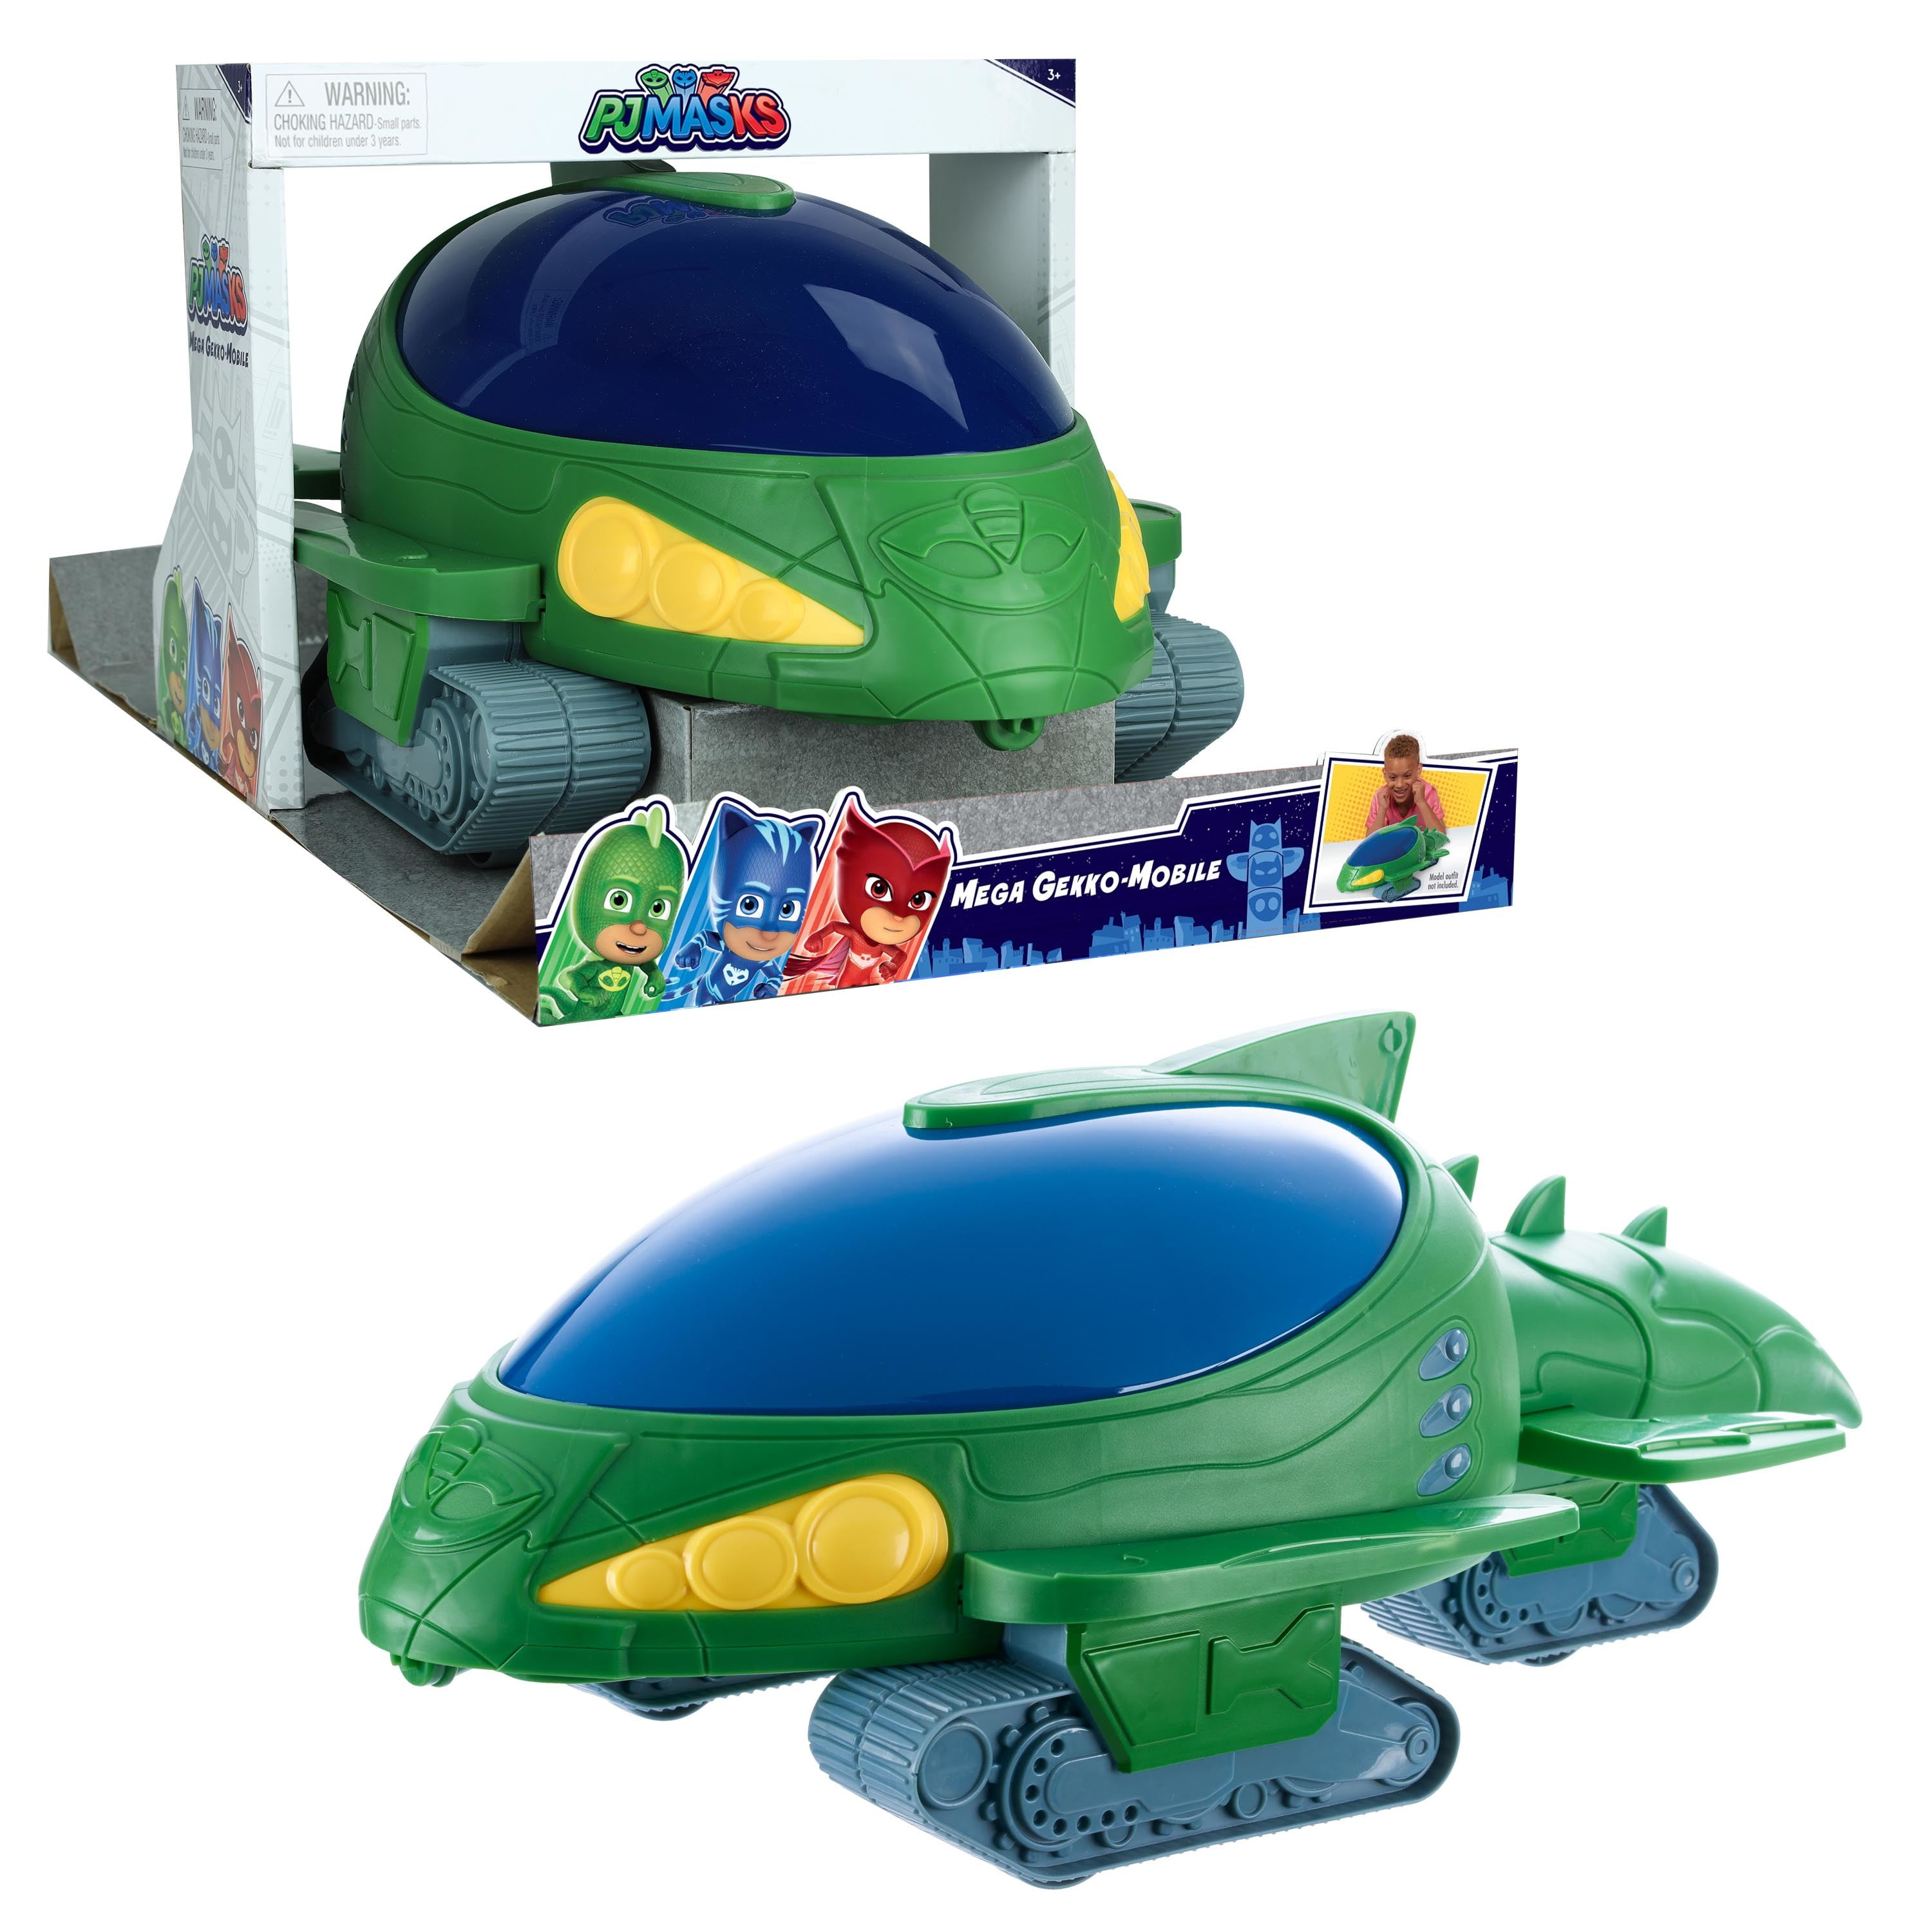 Nickelodeon PJ Masks Megamat With Gekko Character Vehicle Toy for sale online 